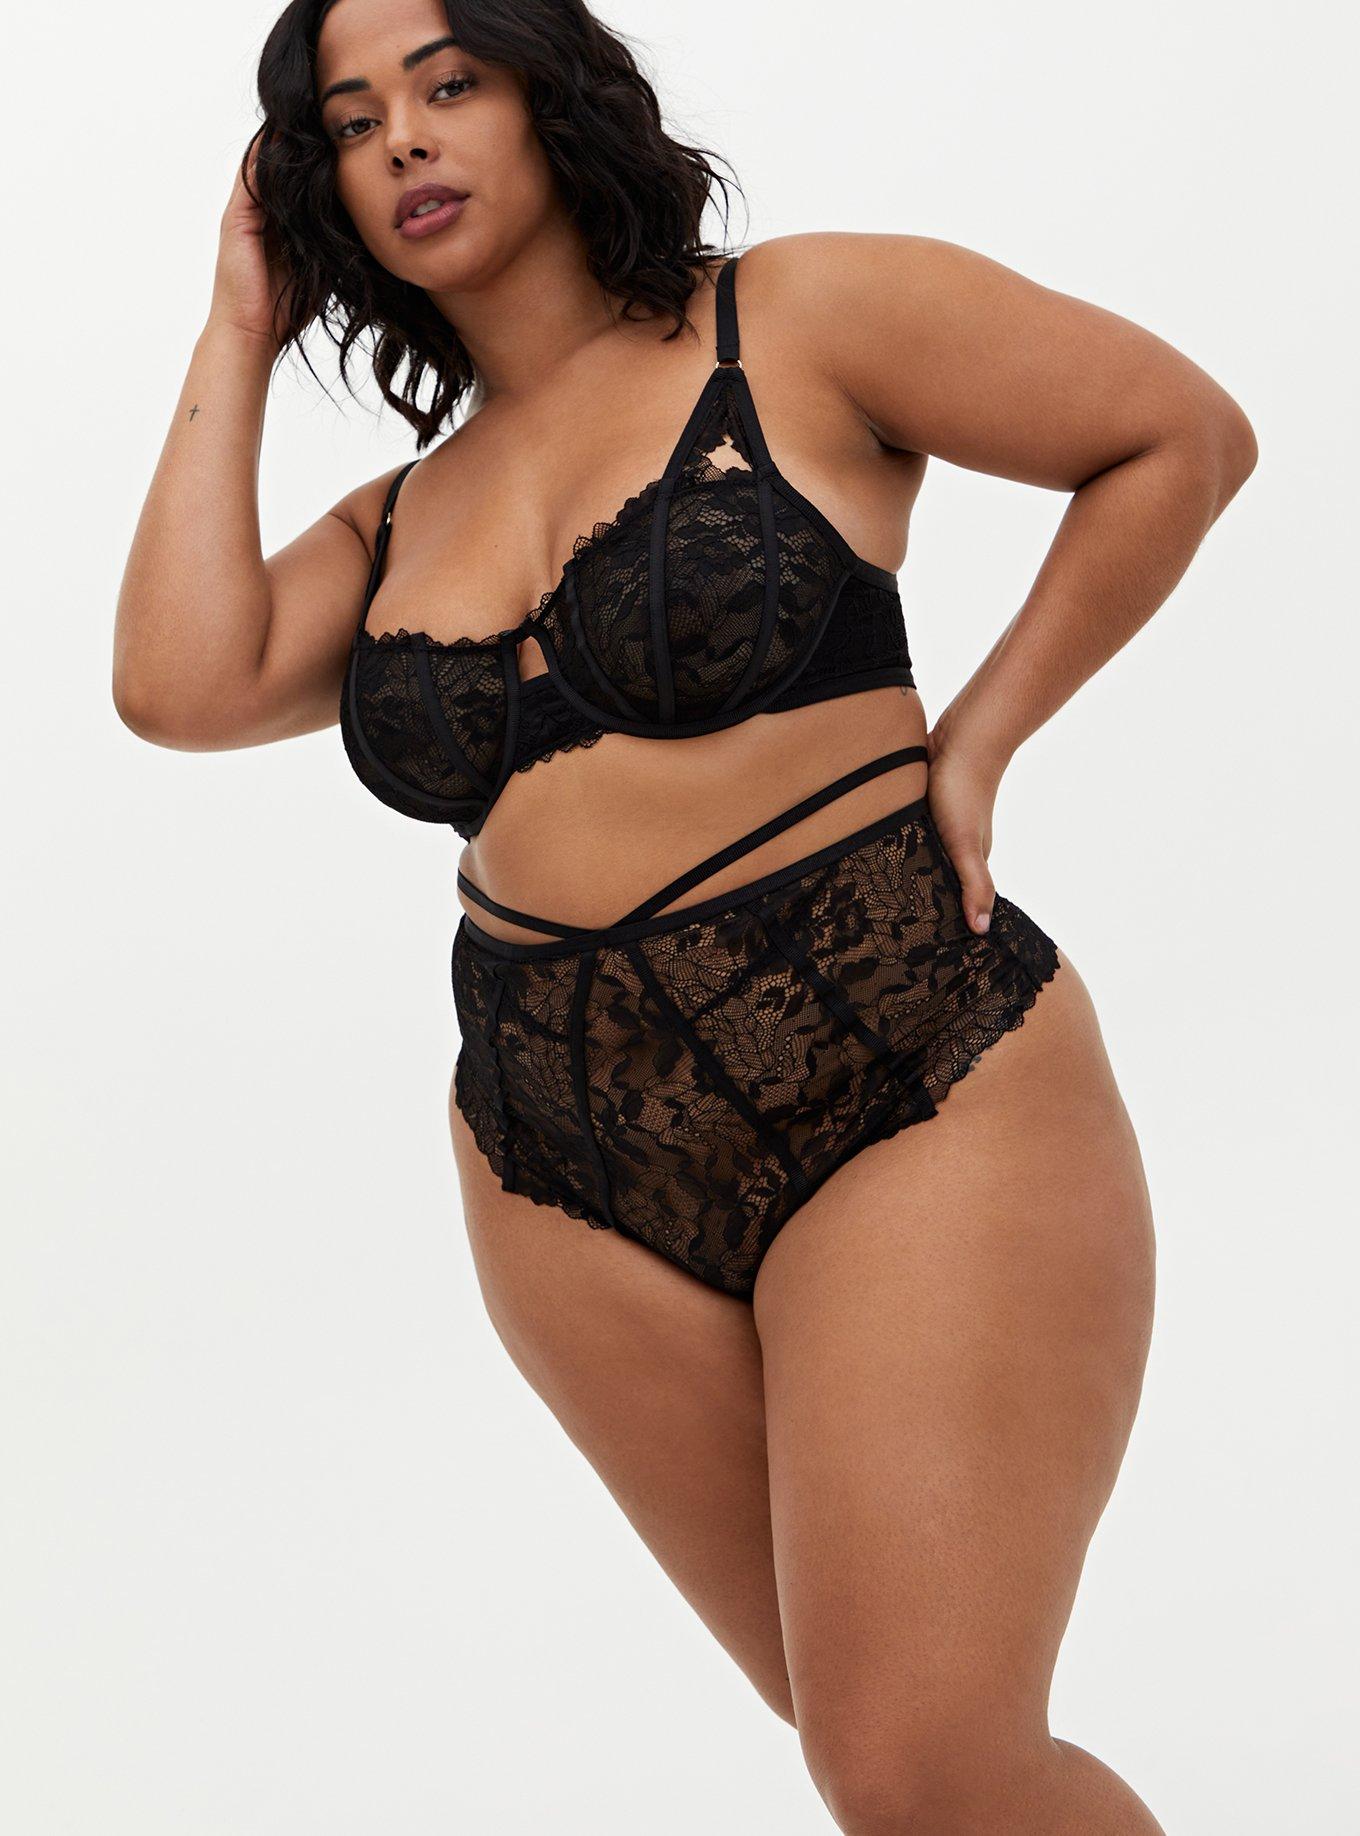 Plus Size - Black Lace Strappy Open Back High Waist Thong Panty